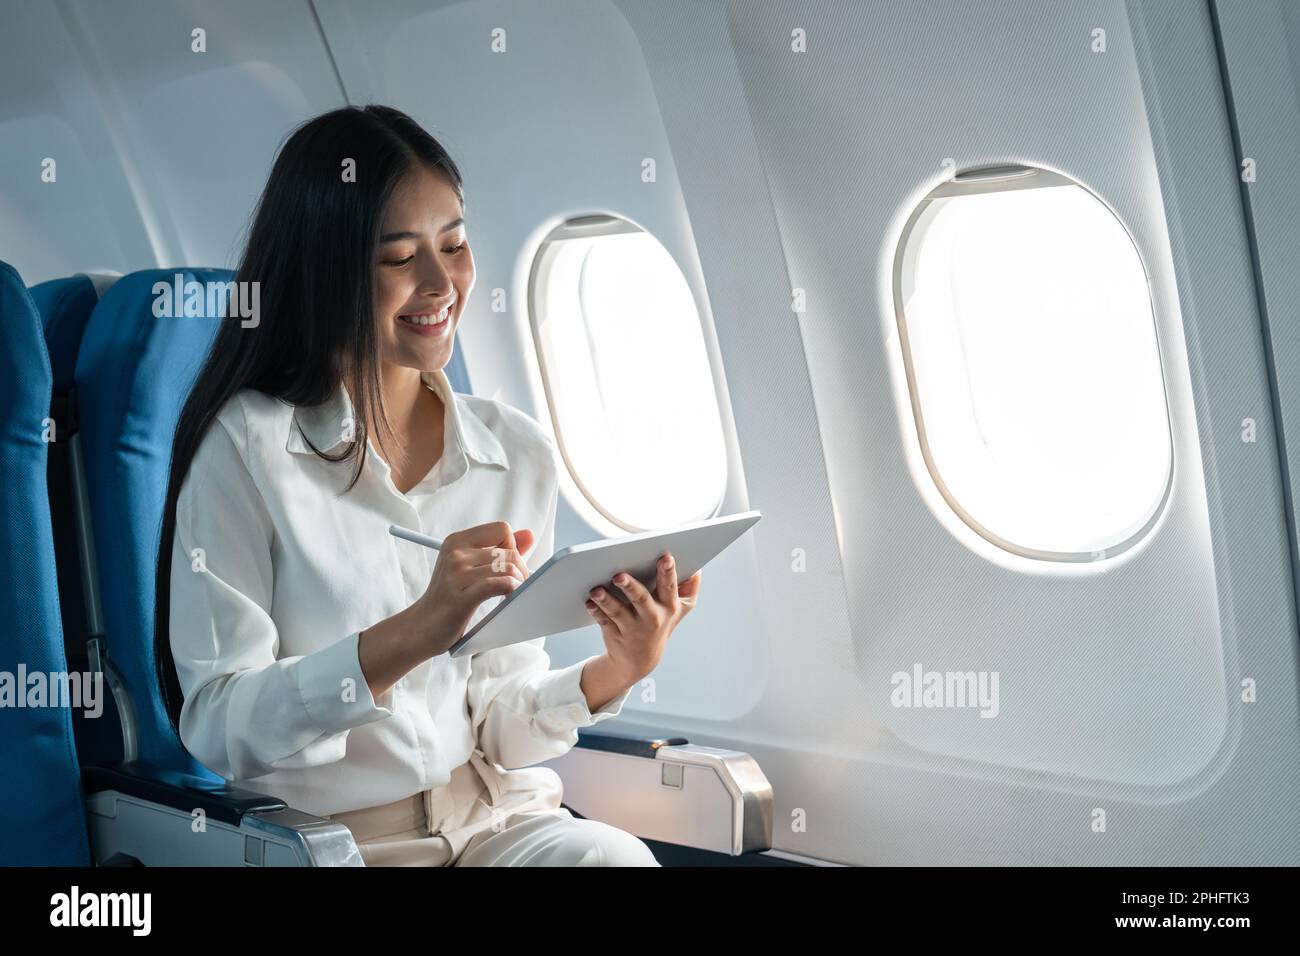 Young asian businesswoman in formal clothes working using tablet with smart pen while sitting in airplane cabin near window traveling to another place Stock Photo